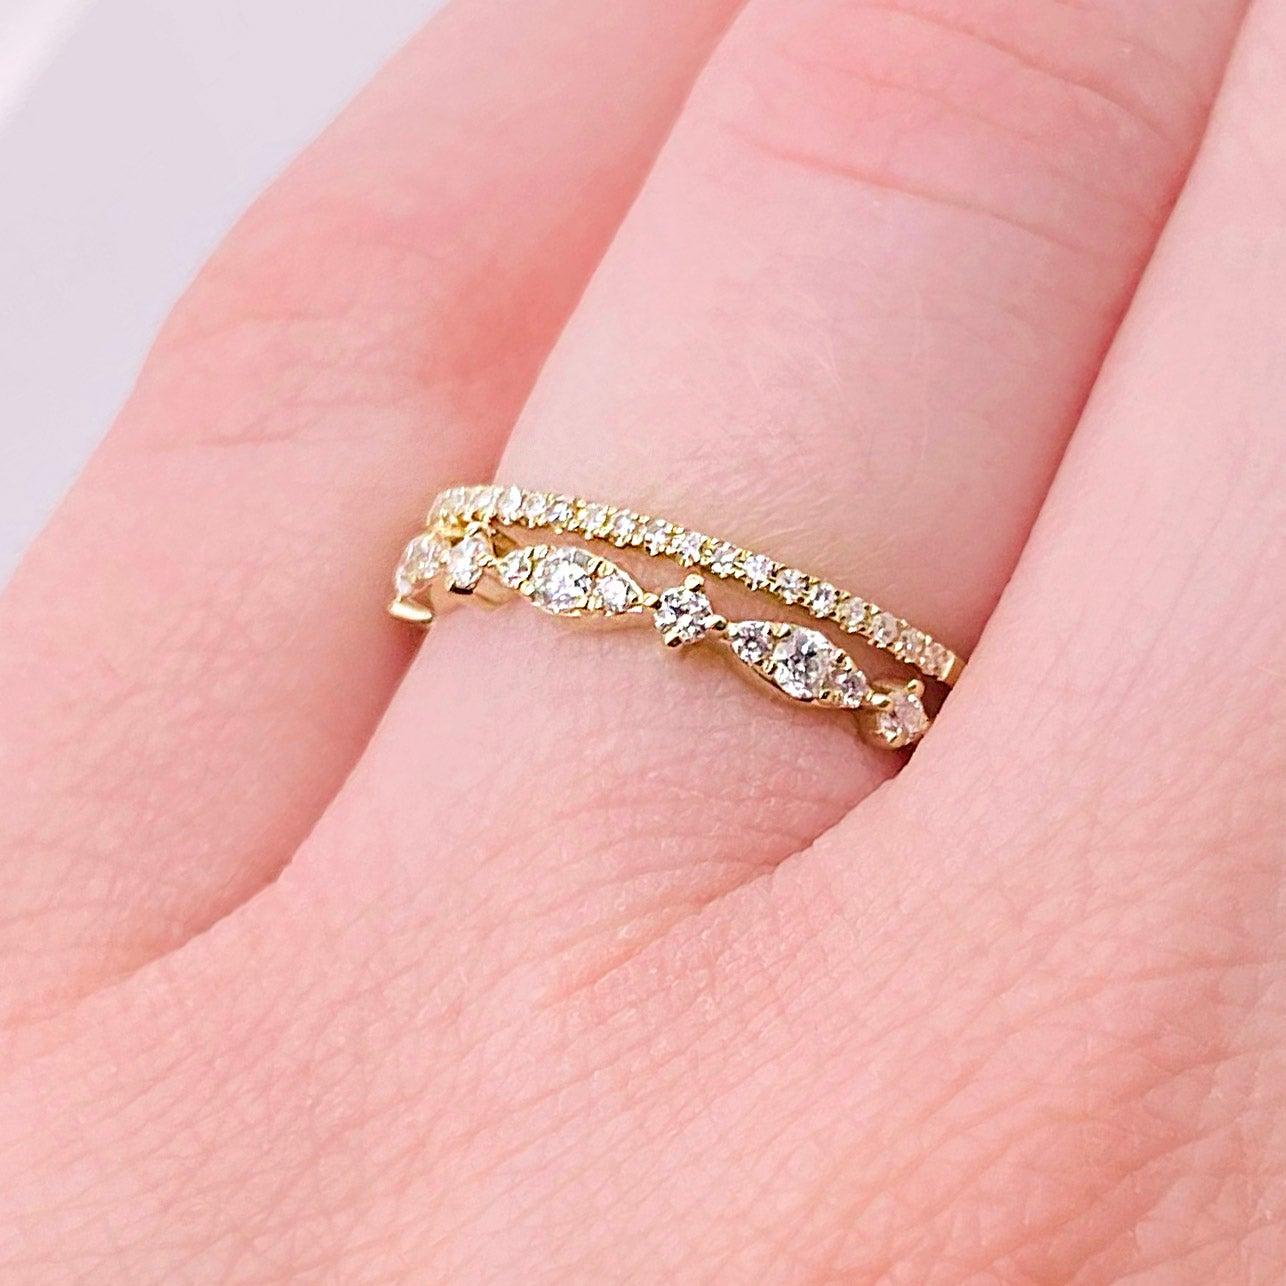 For Sale:  Diamond Duet Ring, 14 Karat Gold Diamond Double Band Ring, Stackable Ring 2